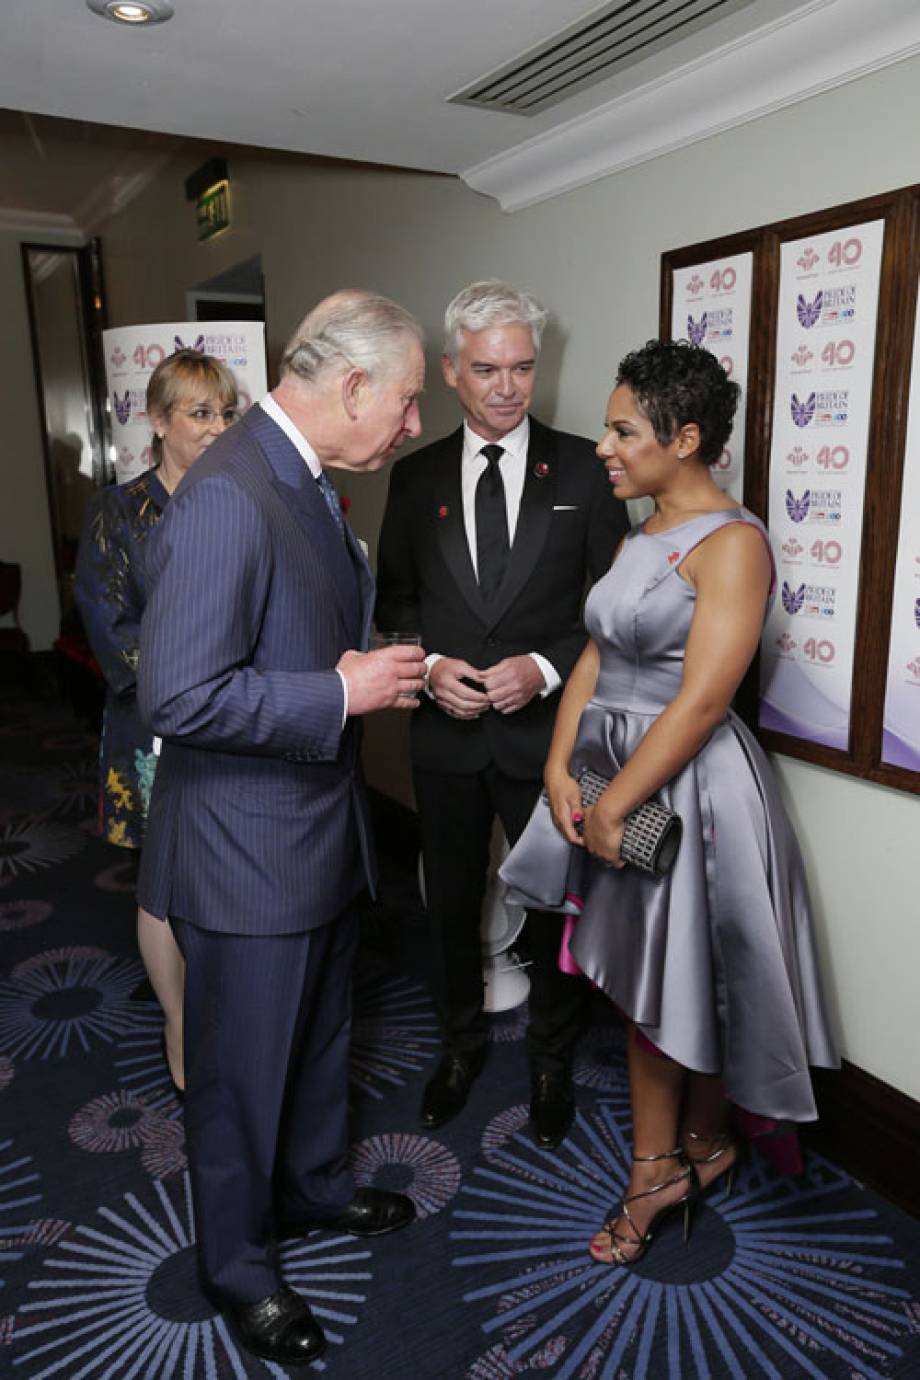 HRH with Phillip Schofield and Francesca Brown, winner of the Young Achiever Award